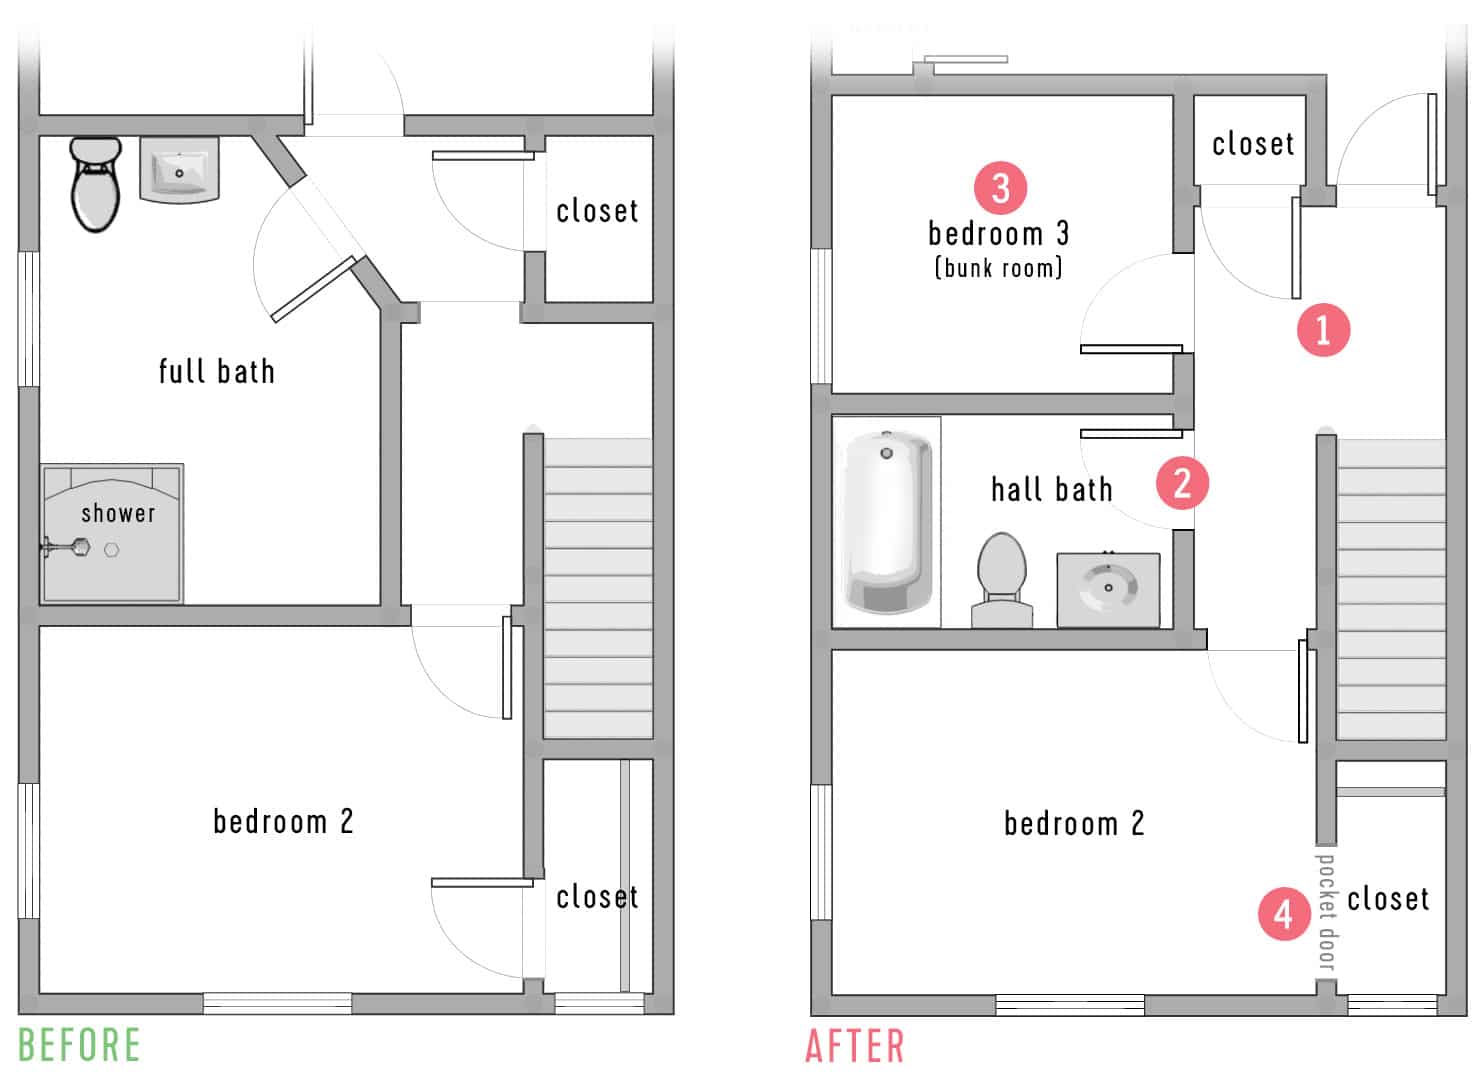 Floorplan of Duplex Showing How Upstairs Was RedesignedTo Add Bunk Room And Closet